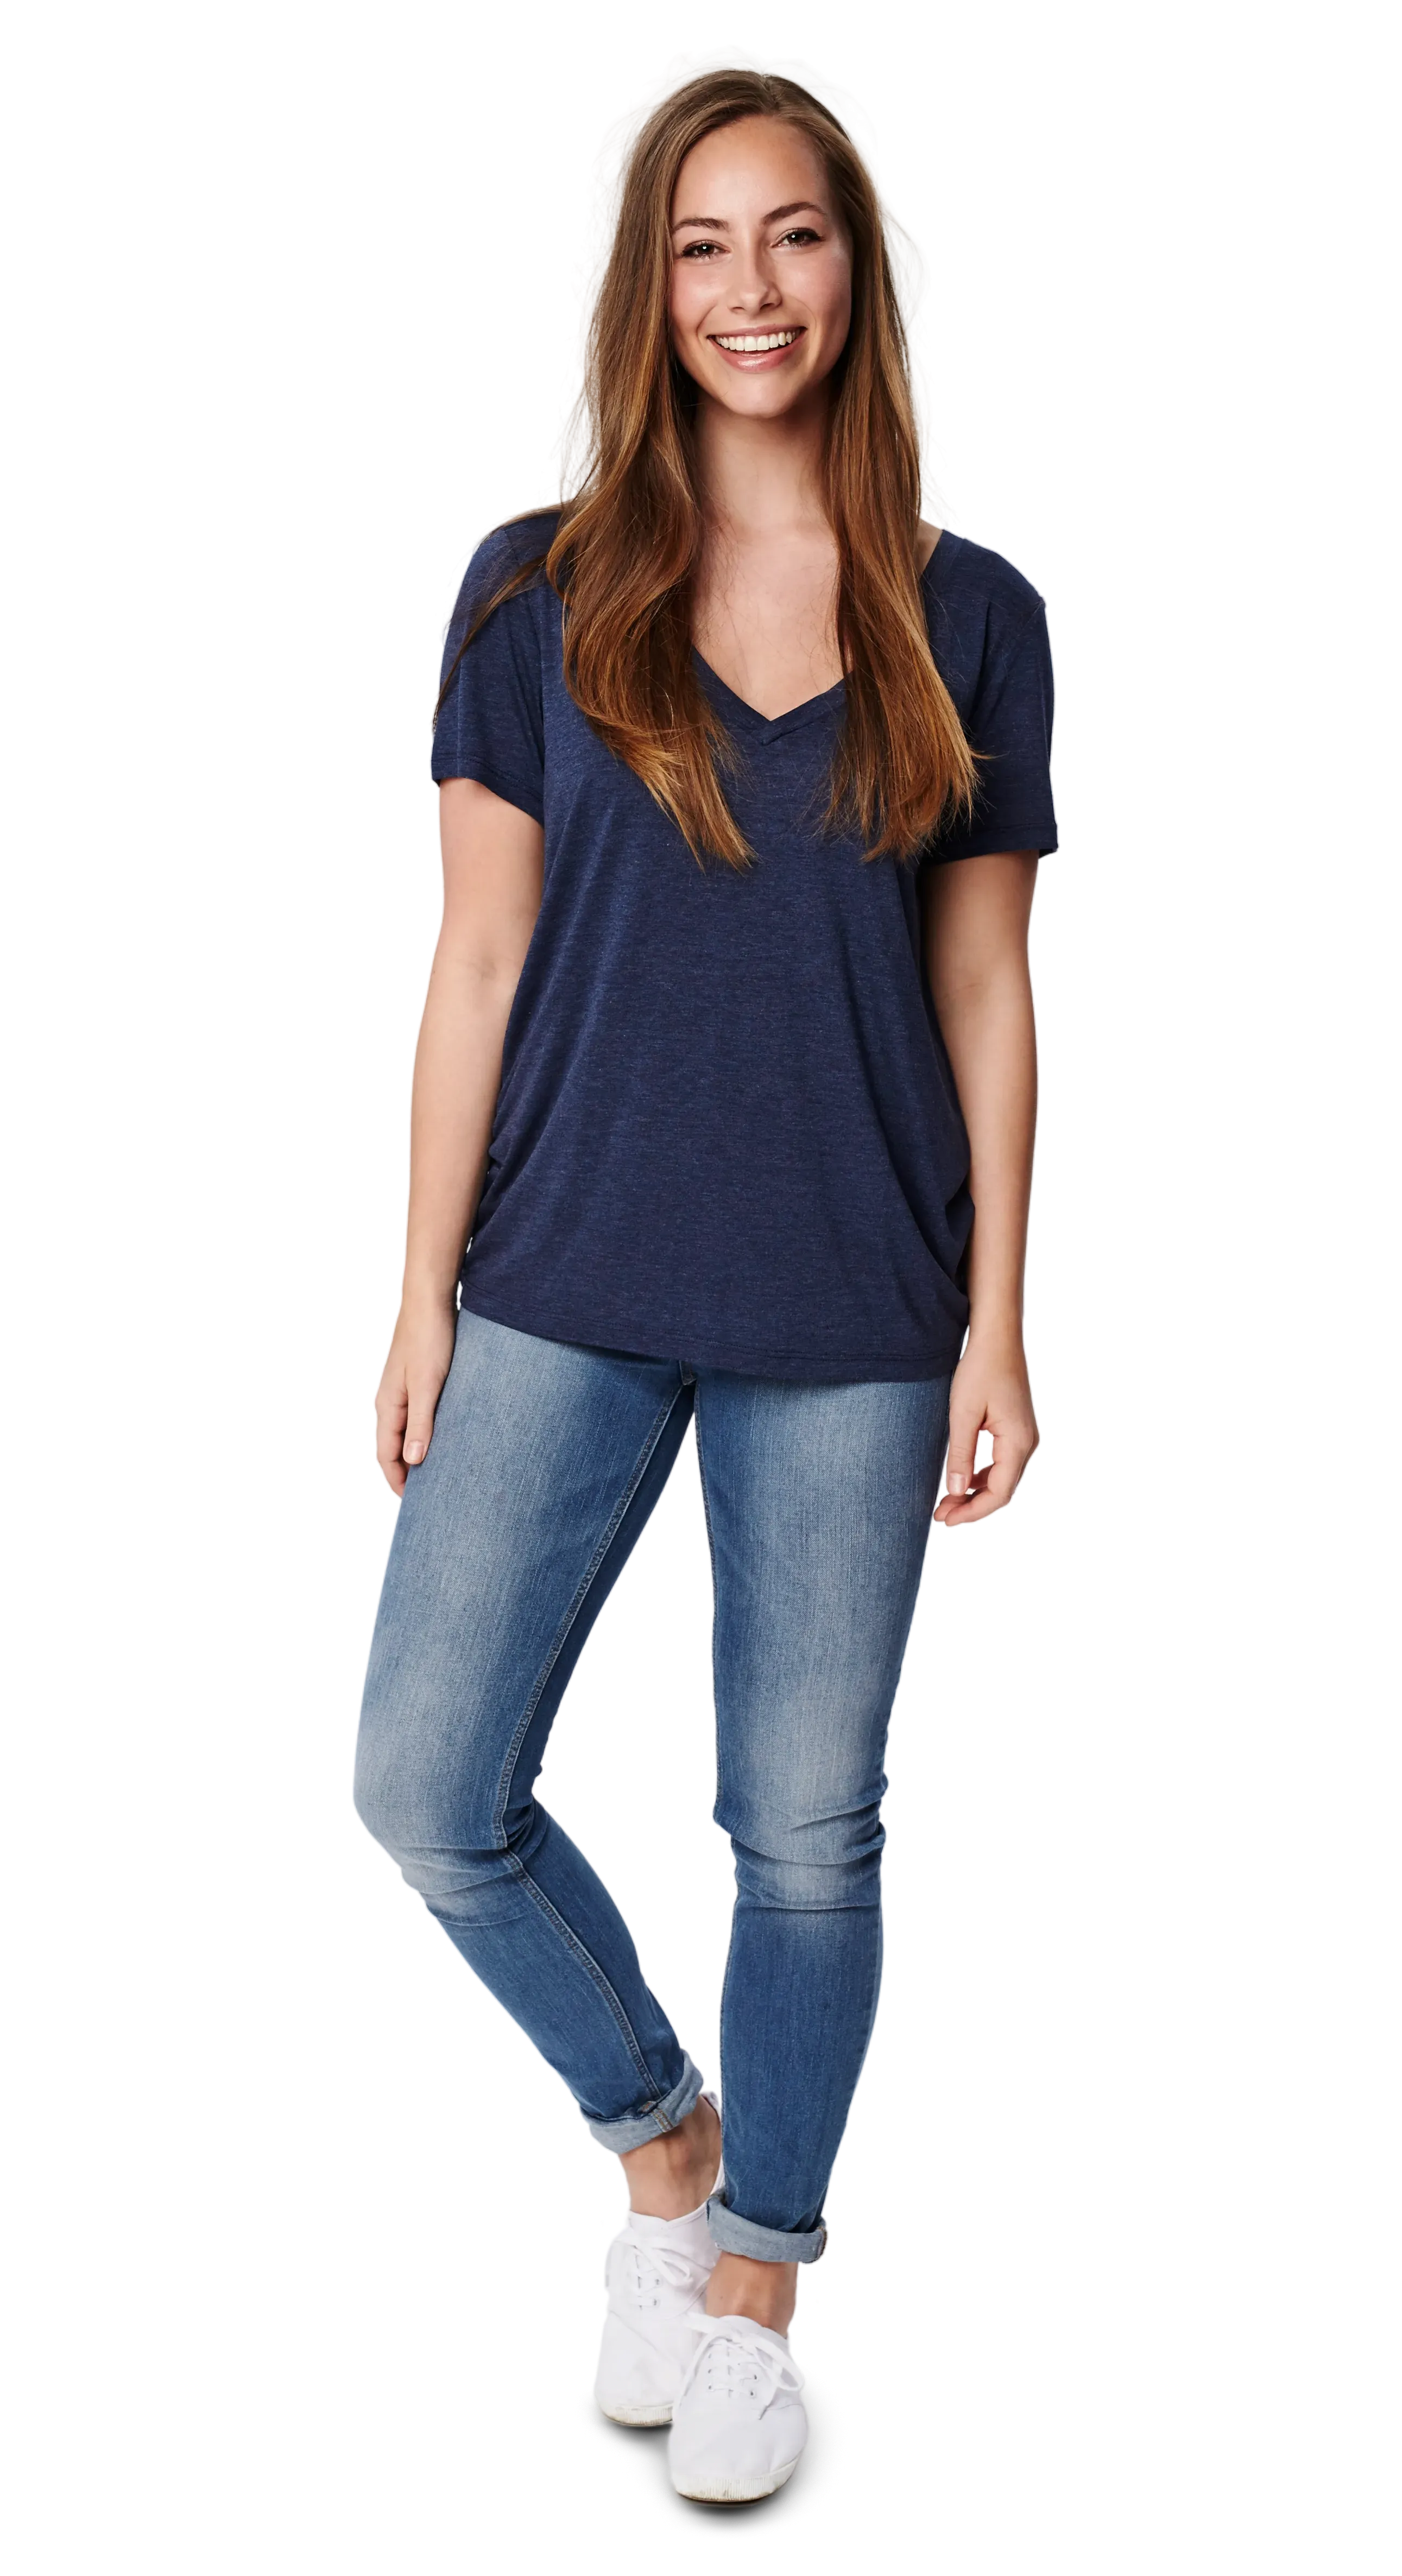 relaxed woman in jeans and black tee